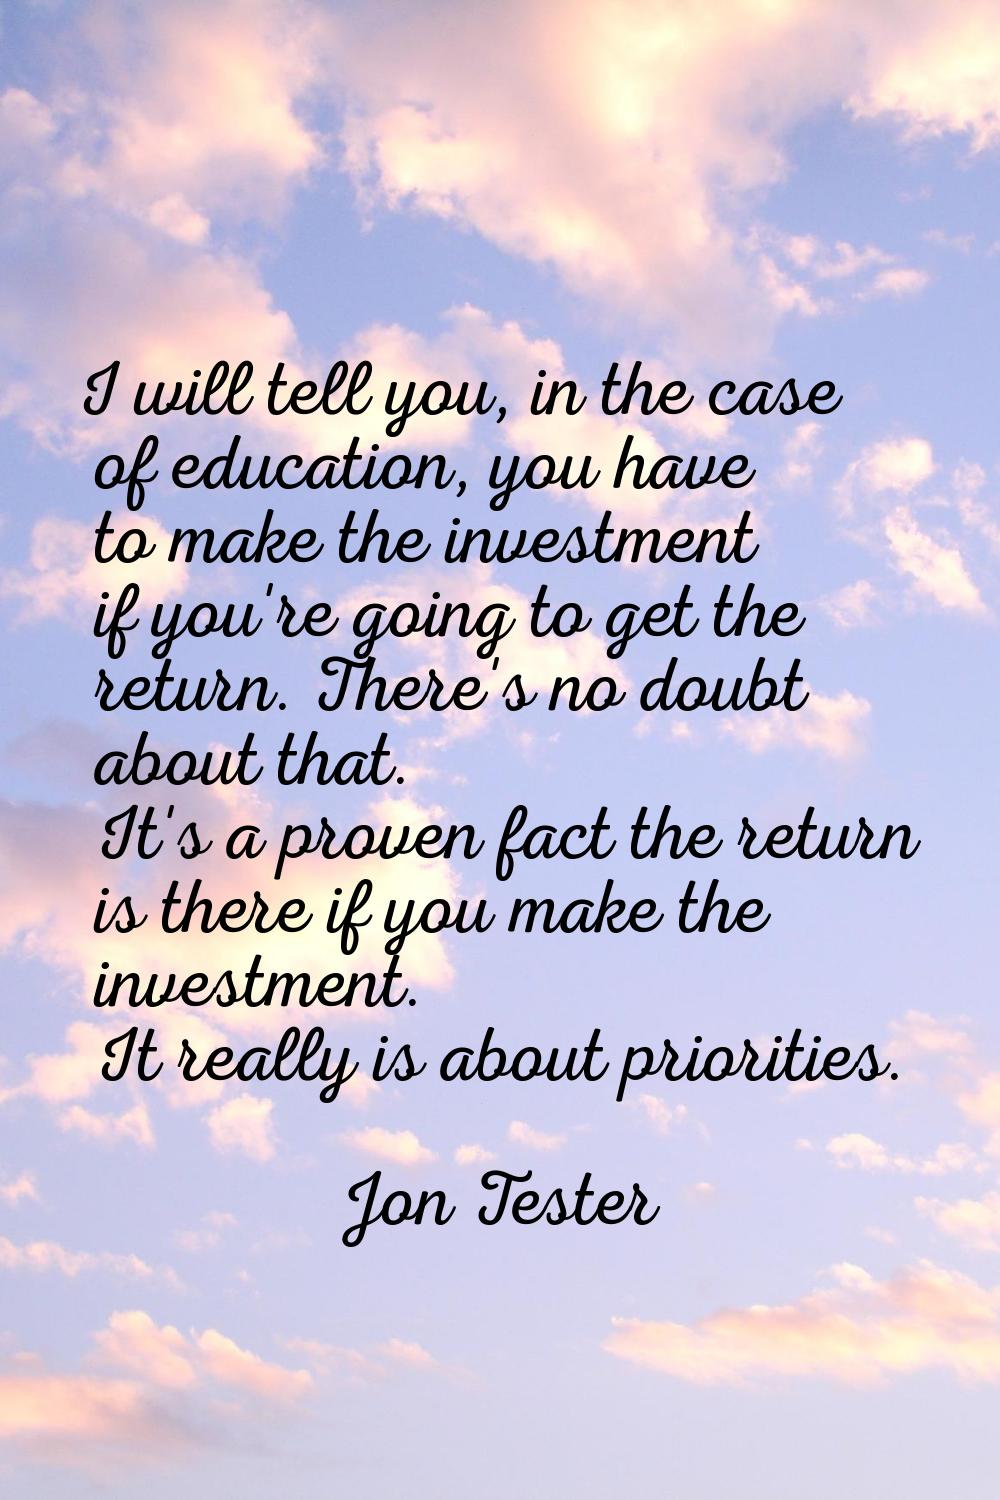 I will tell you, in the case of education, you have to make the investment if you're going to get t